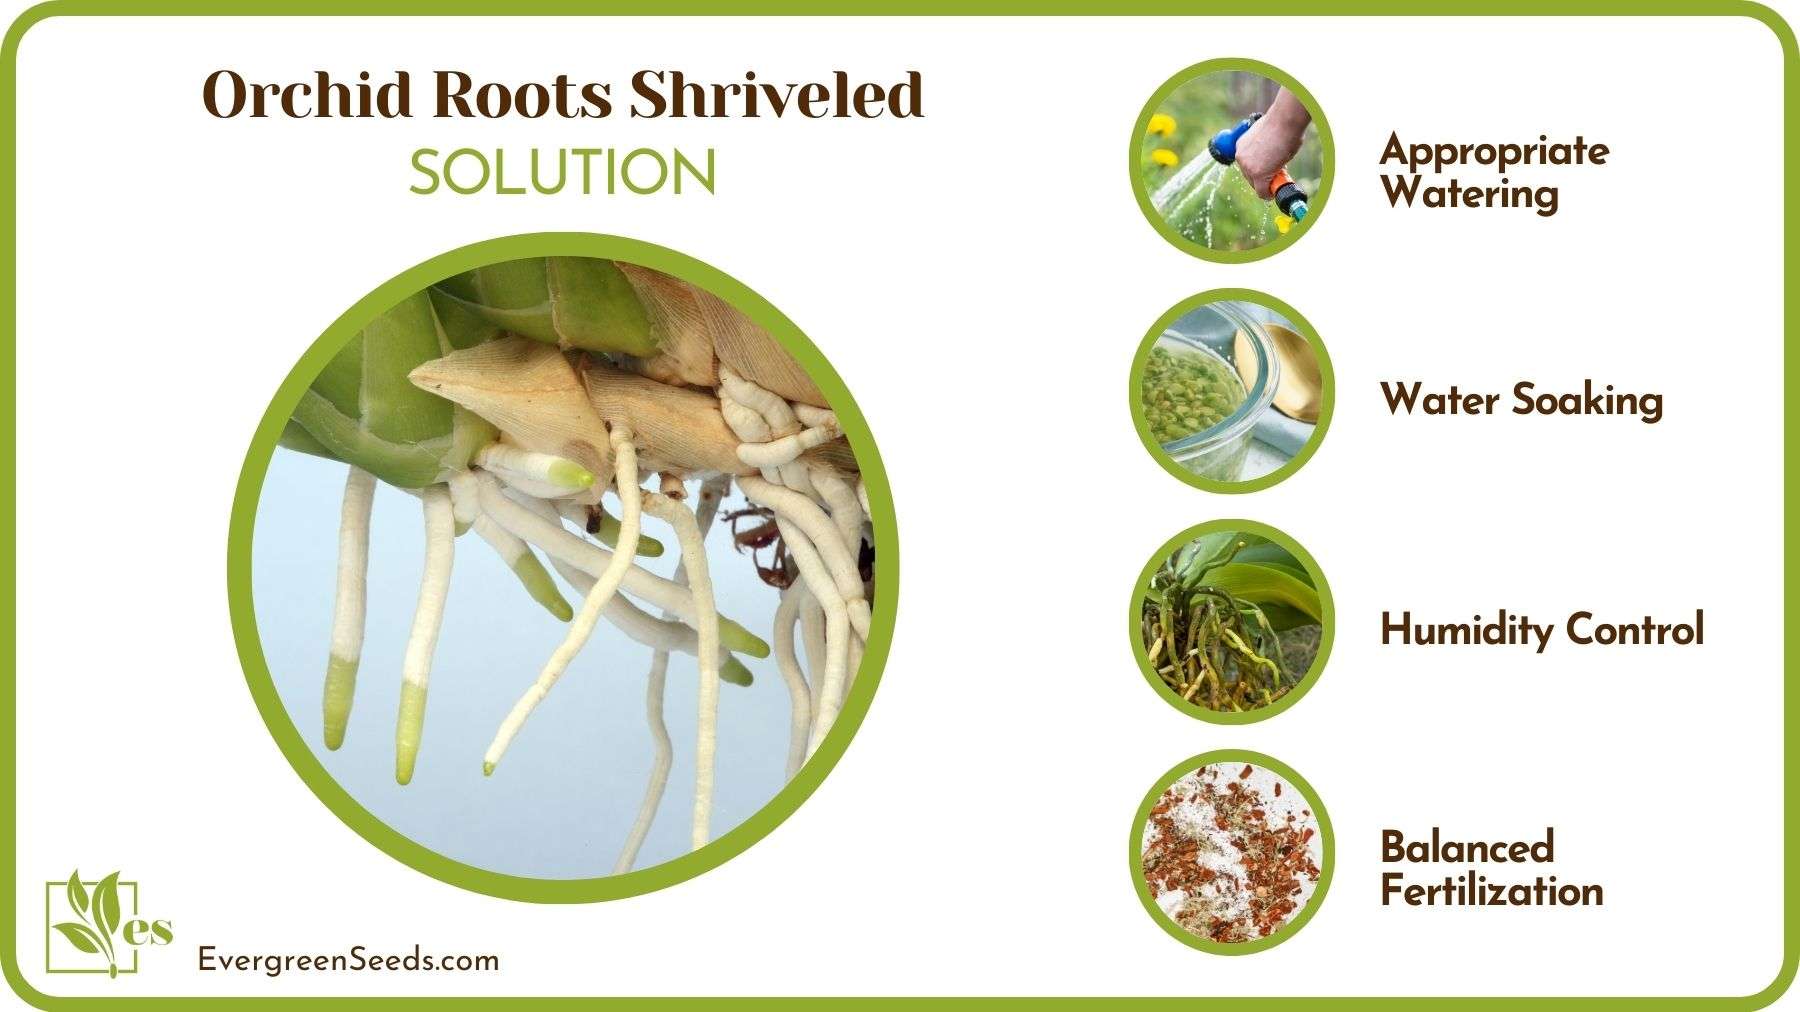 Prevent Orchid Roots Shriveled